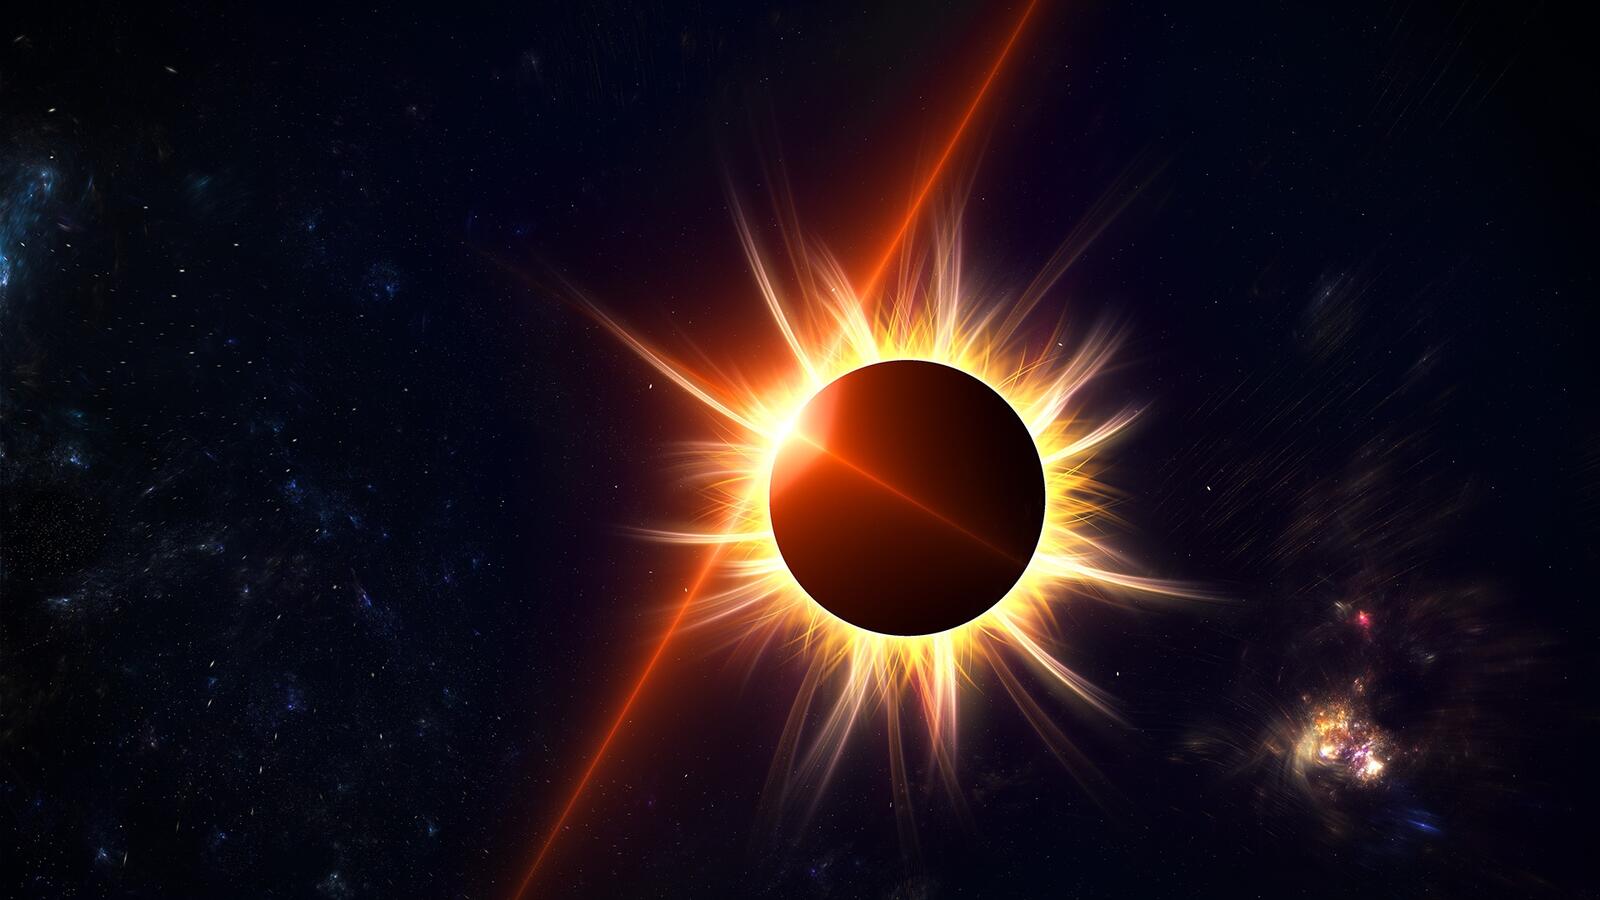 Wallpapers solar eclipse crown flash on the desktop